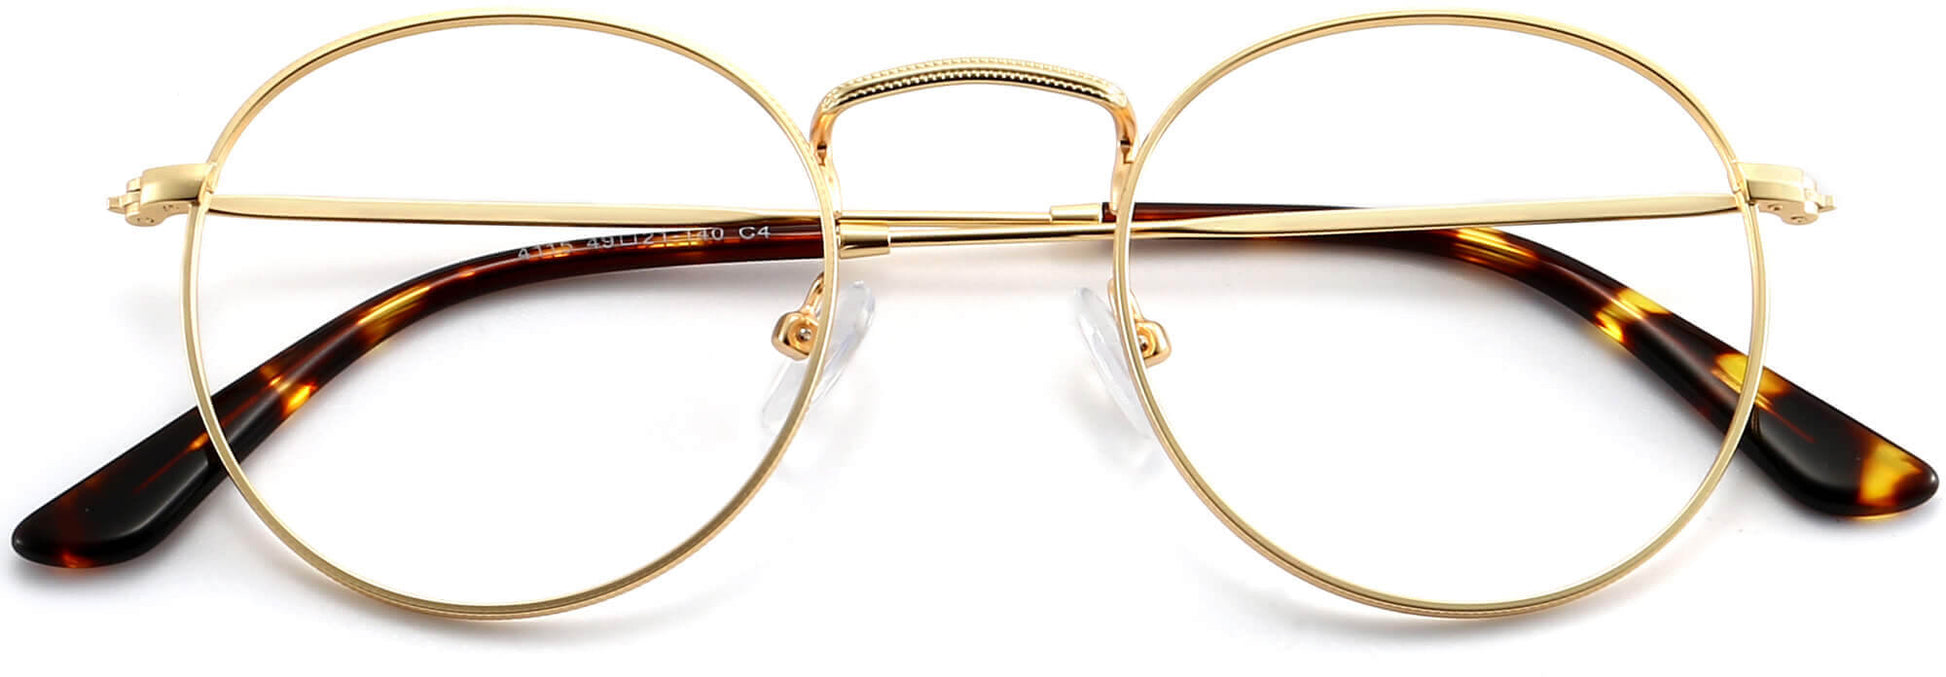 Dominic Round Gold Eyeglasses from ANRRI, closed view